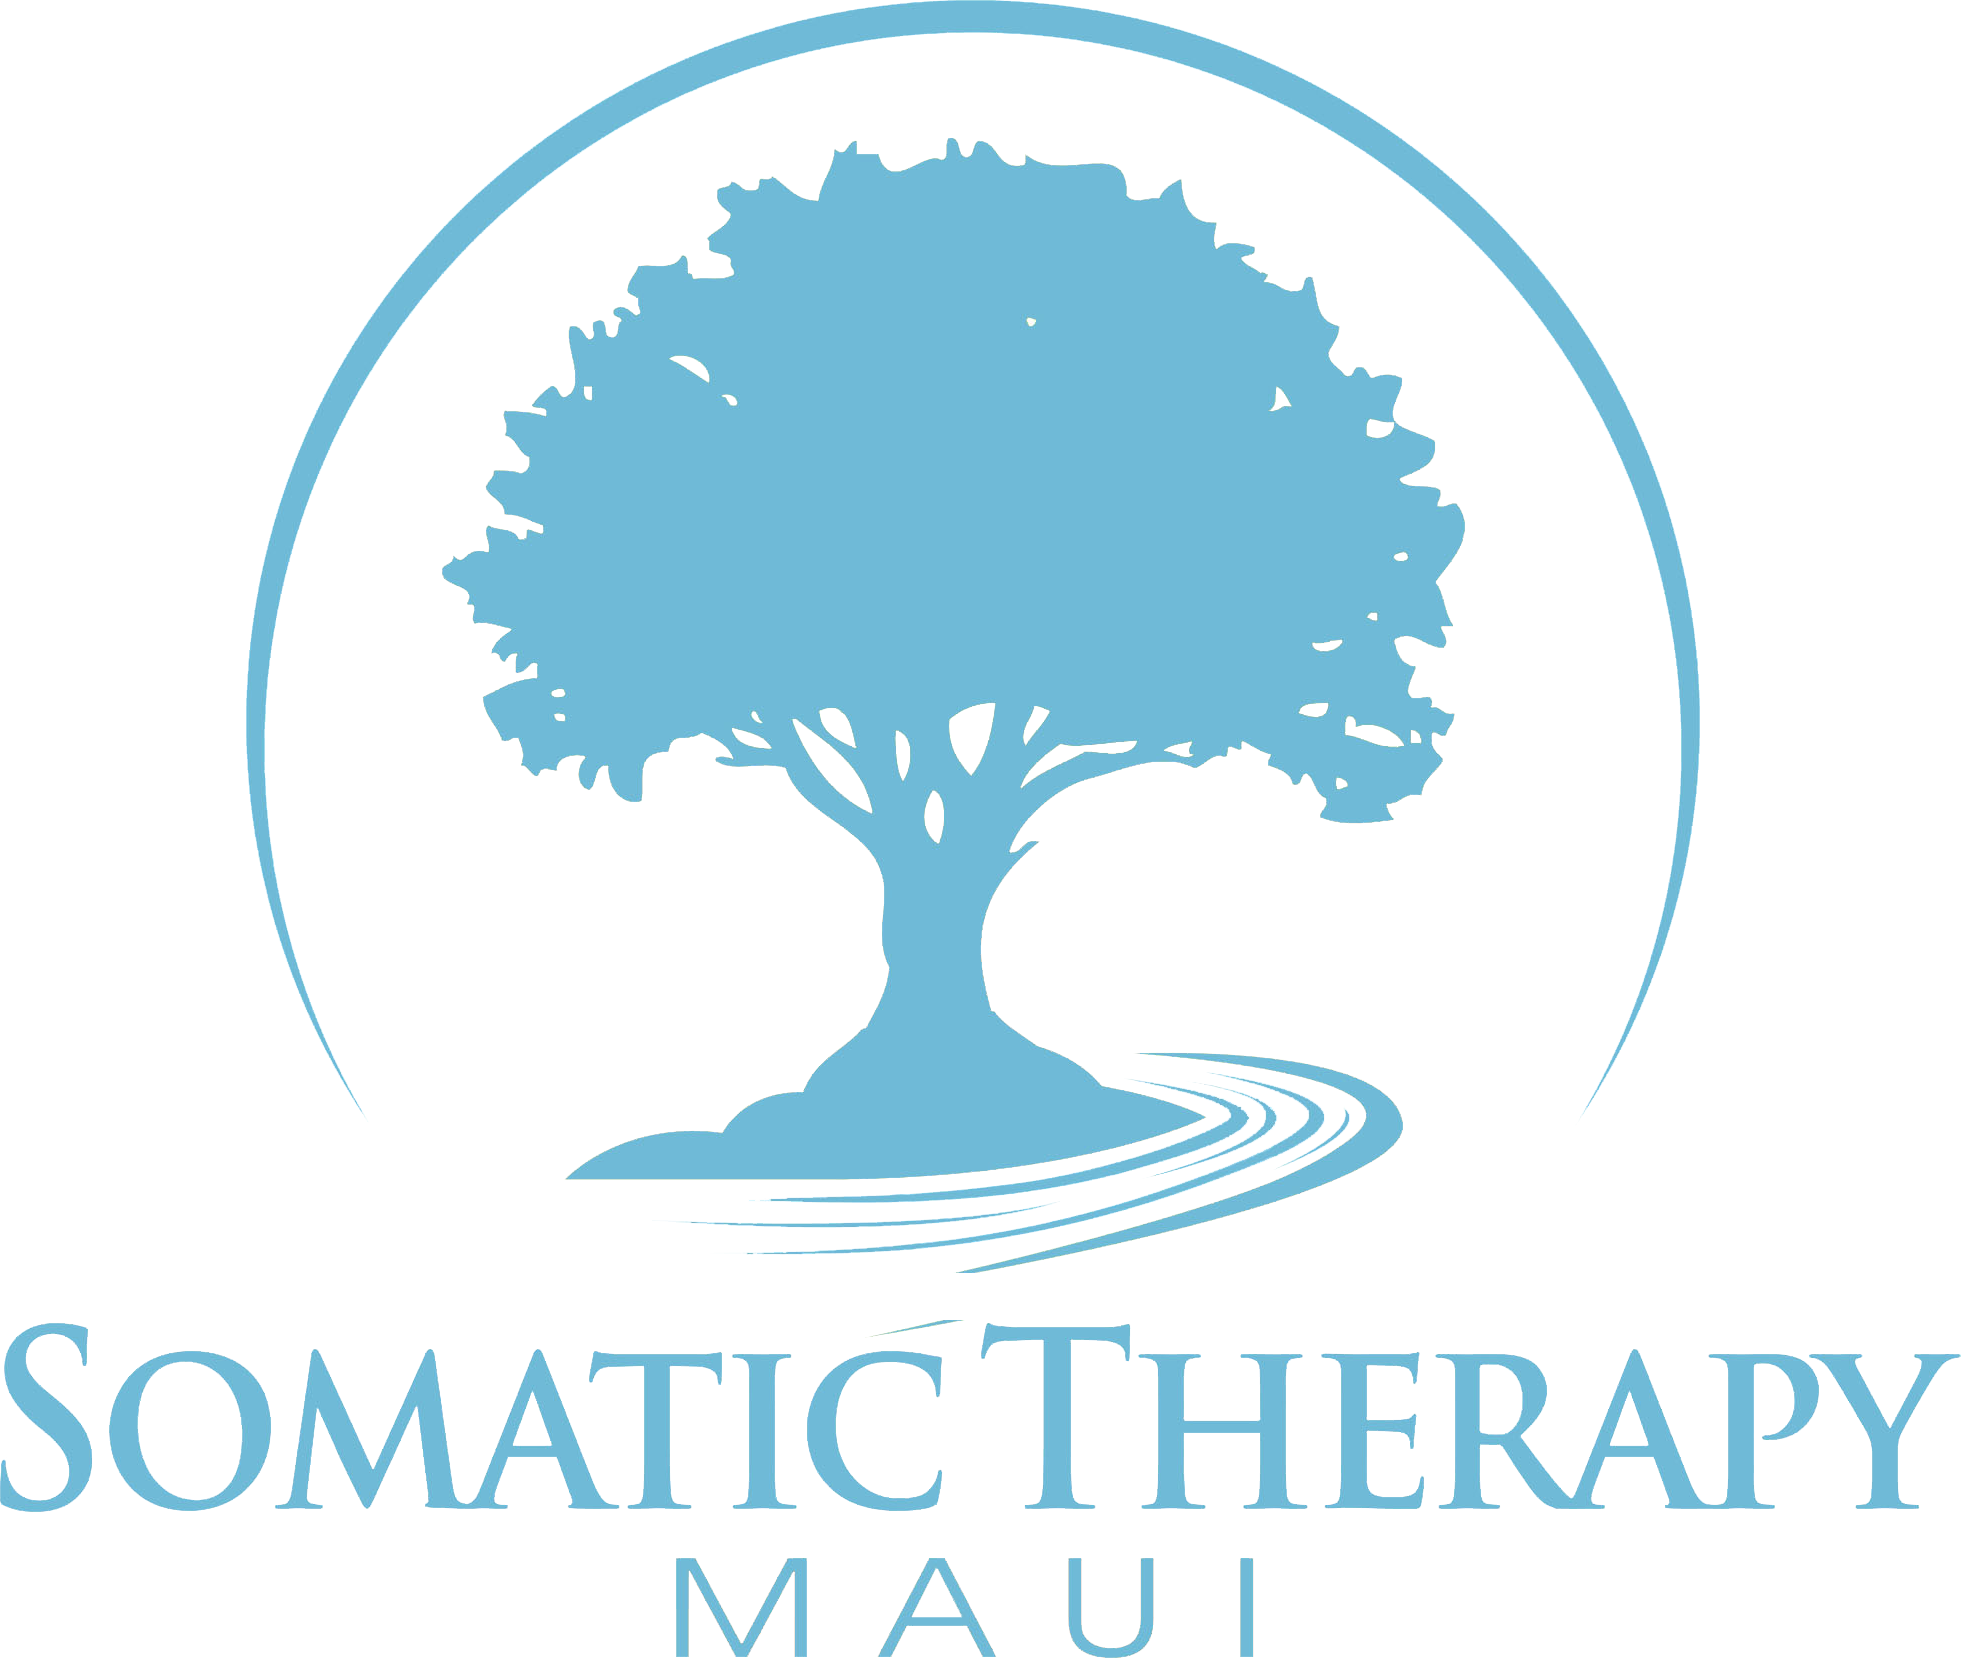 Somatic Therapy Maui